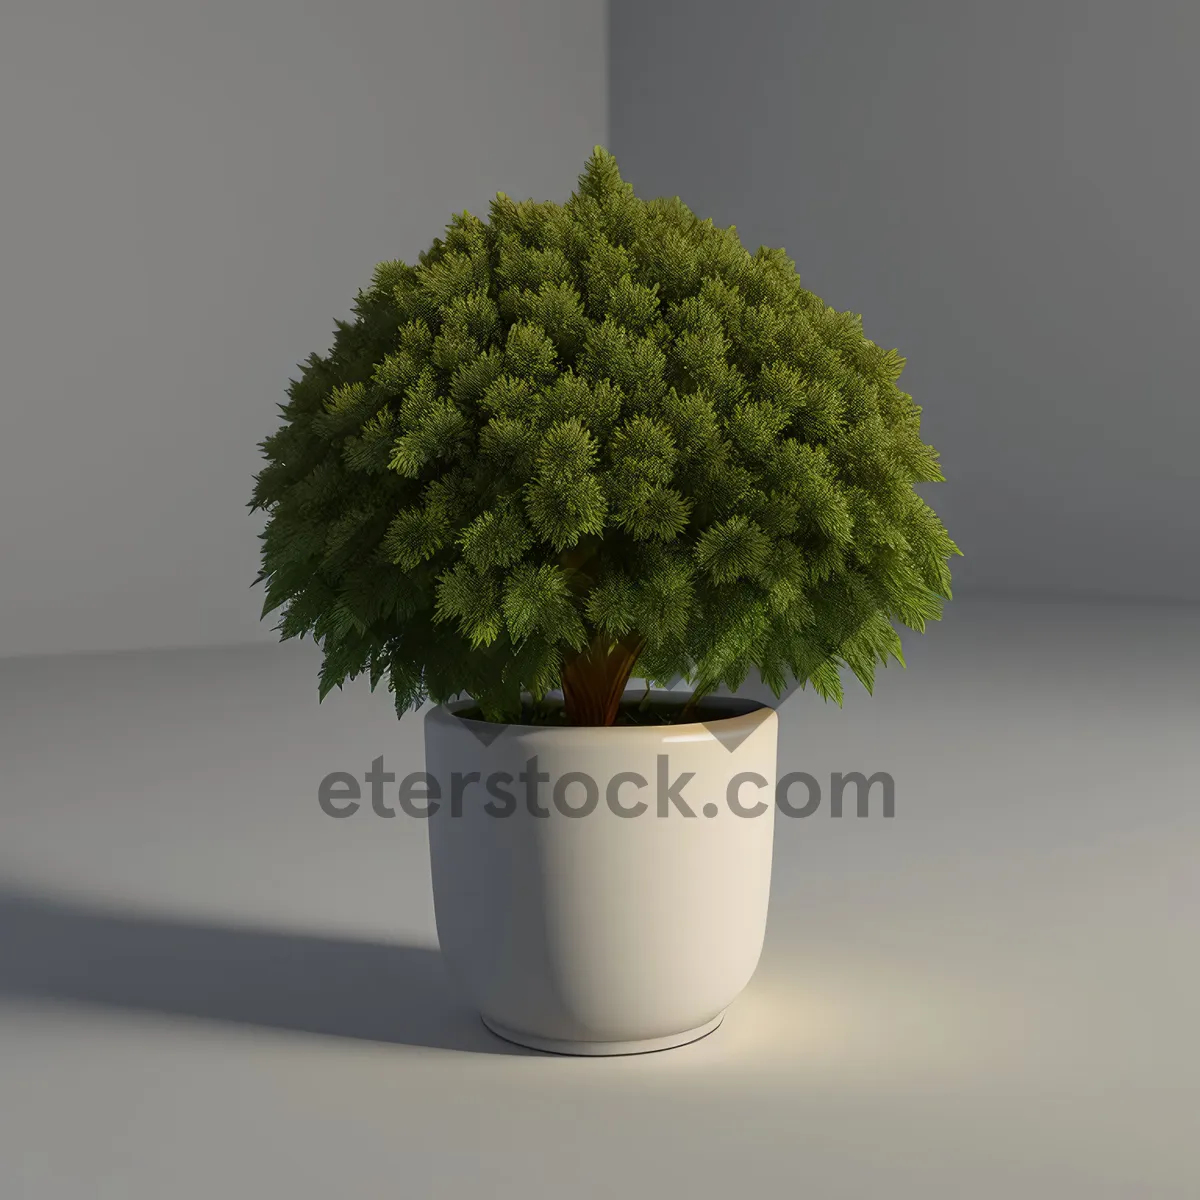 Picture of Fresh Bonsai Plant in Pot - Leafy Growth